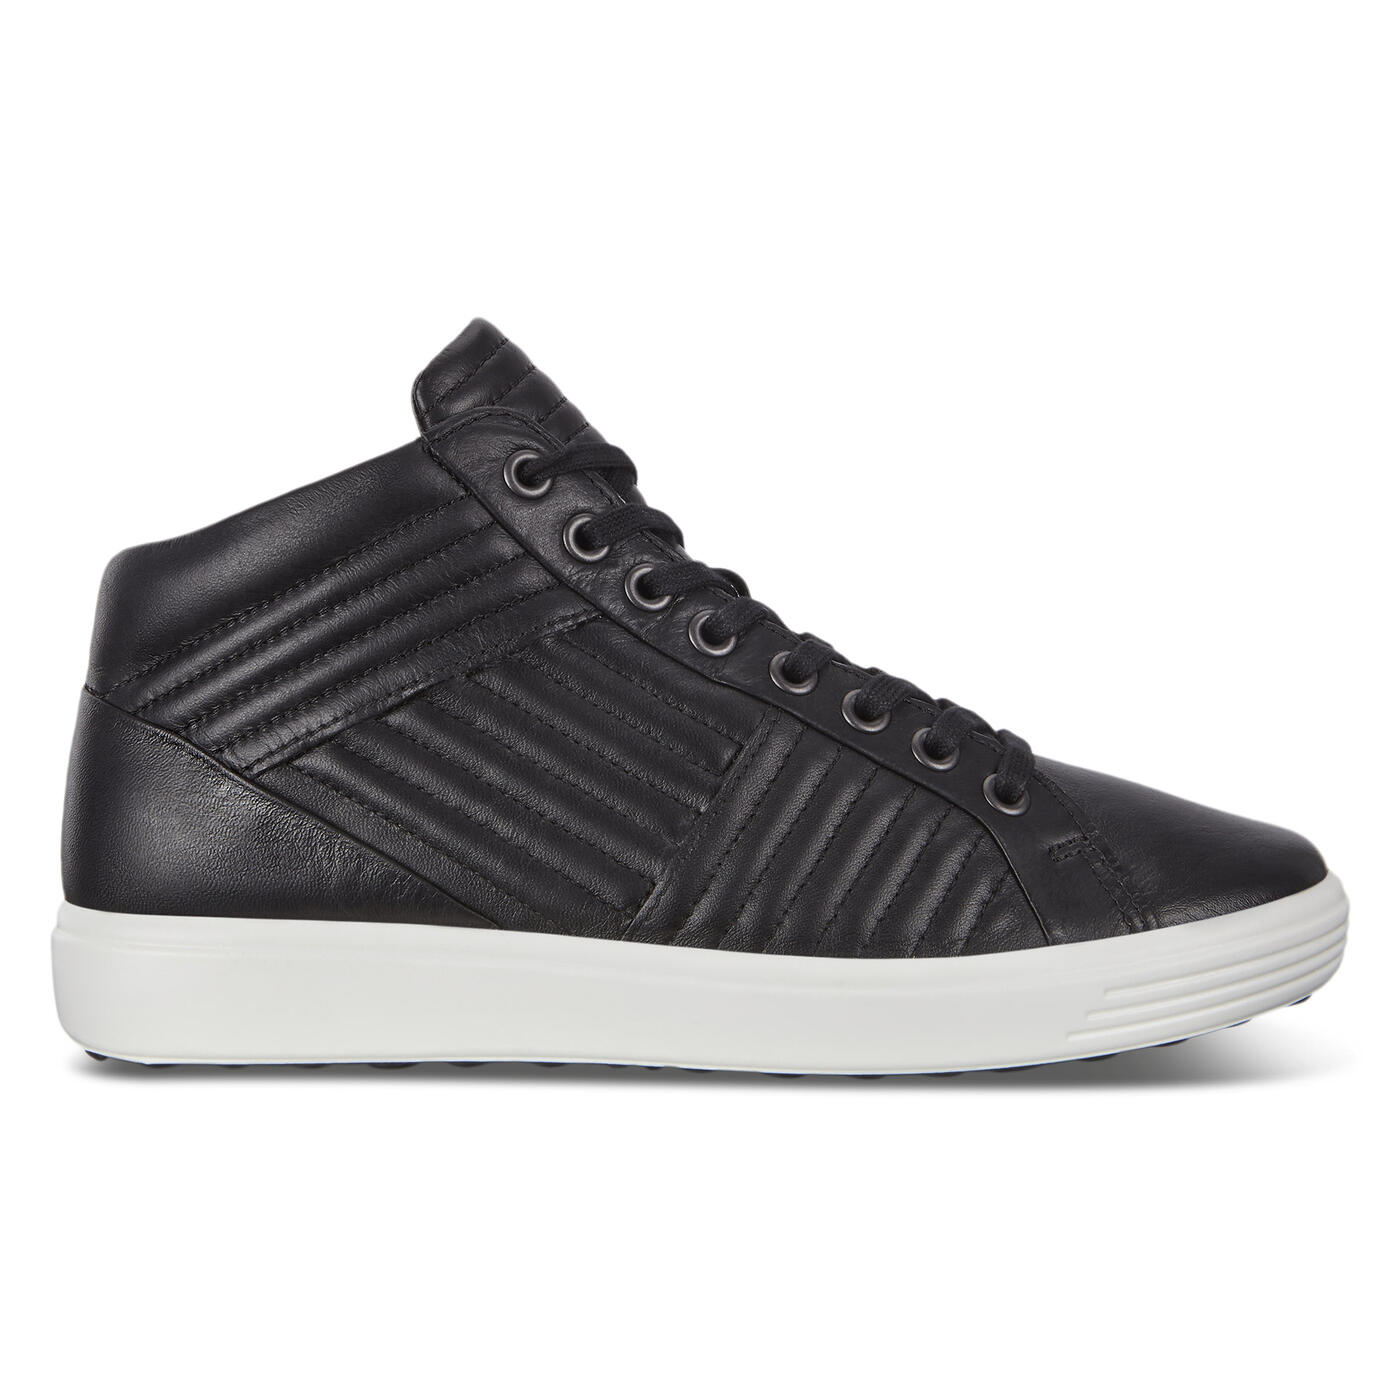 Women's Soft 7 High Top Sneakers | Order Today | ECCO® Shoes